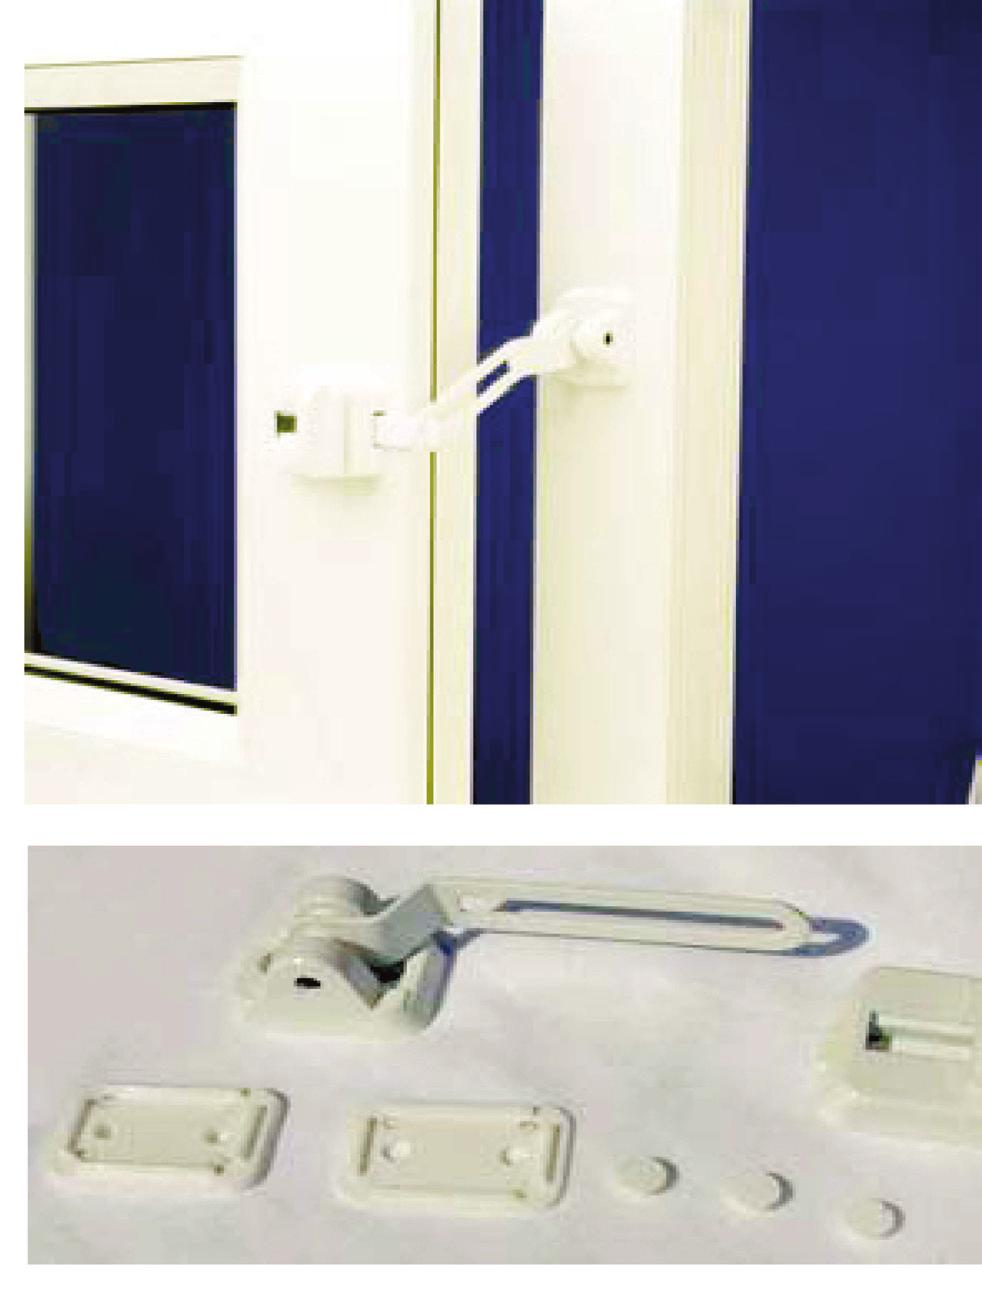 DOOR SAFE T BAR v A home safety door chain type device v Specifically designed for PVCu doors v Non-handed v Face fix retro device v Suitable for open-in or open-out doors v 1.